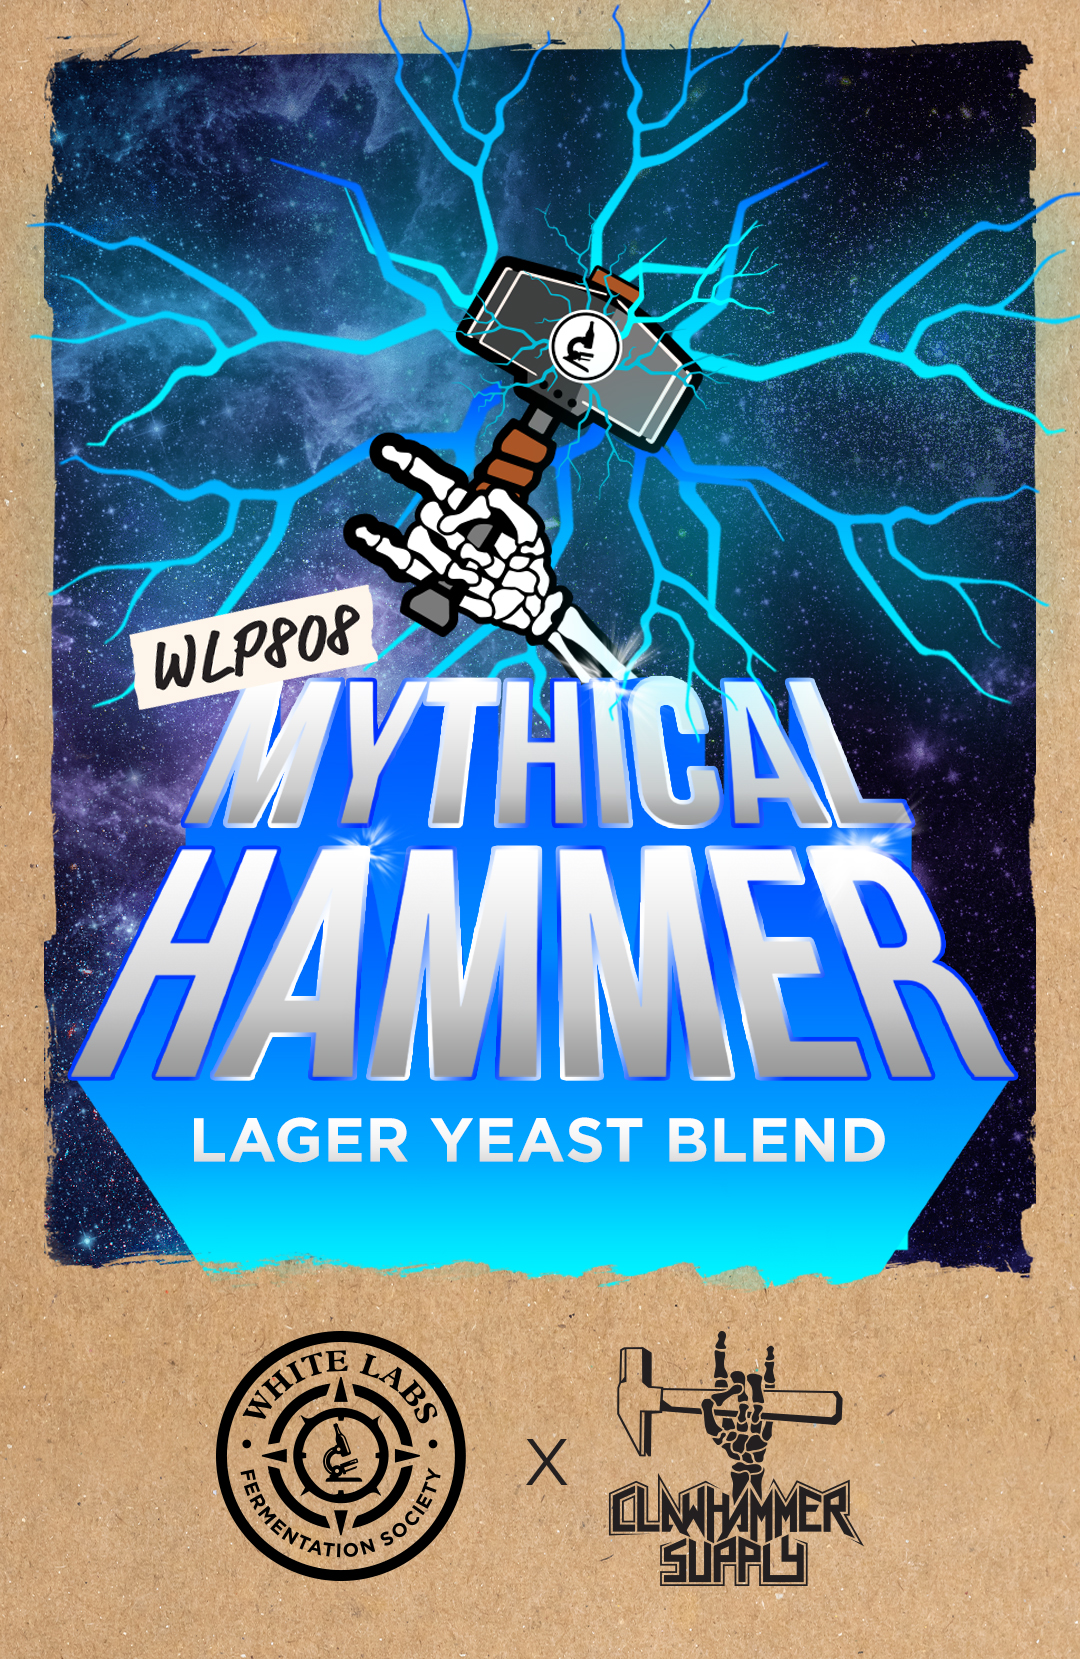 WLP808 Mythical Hammer Lager Yeast Blend